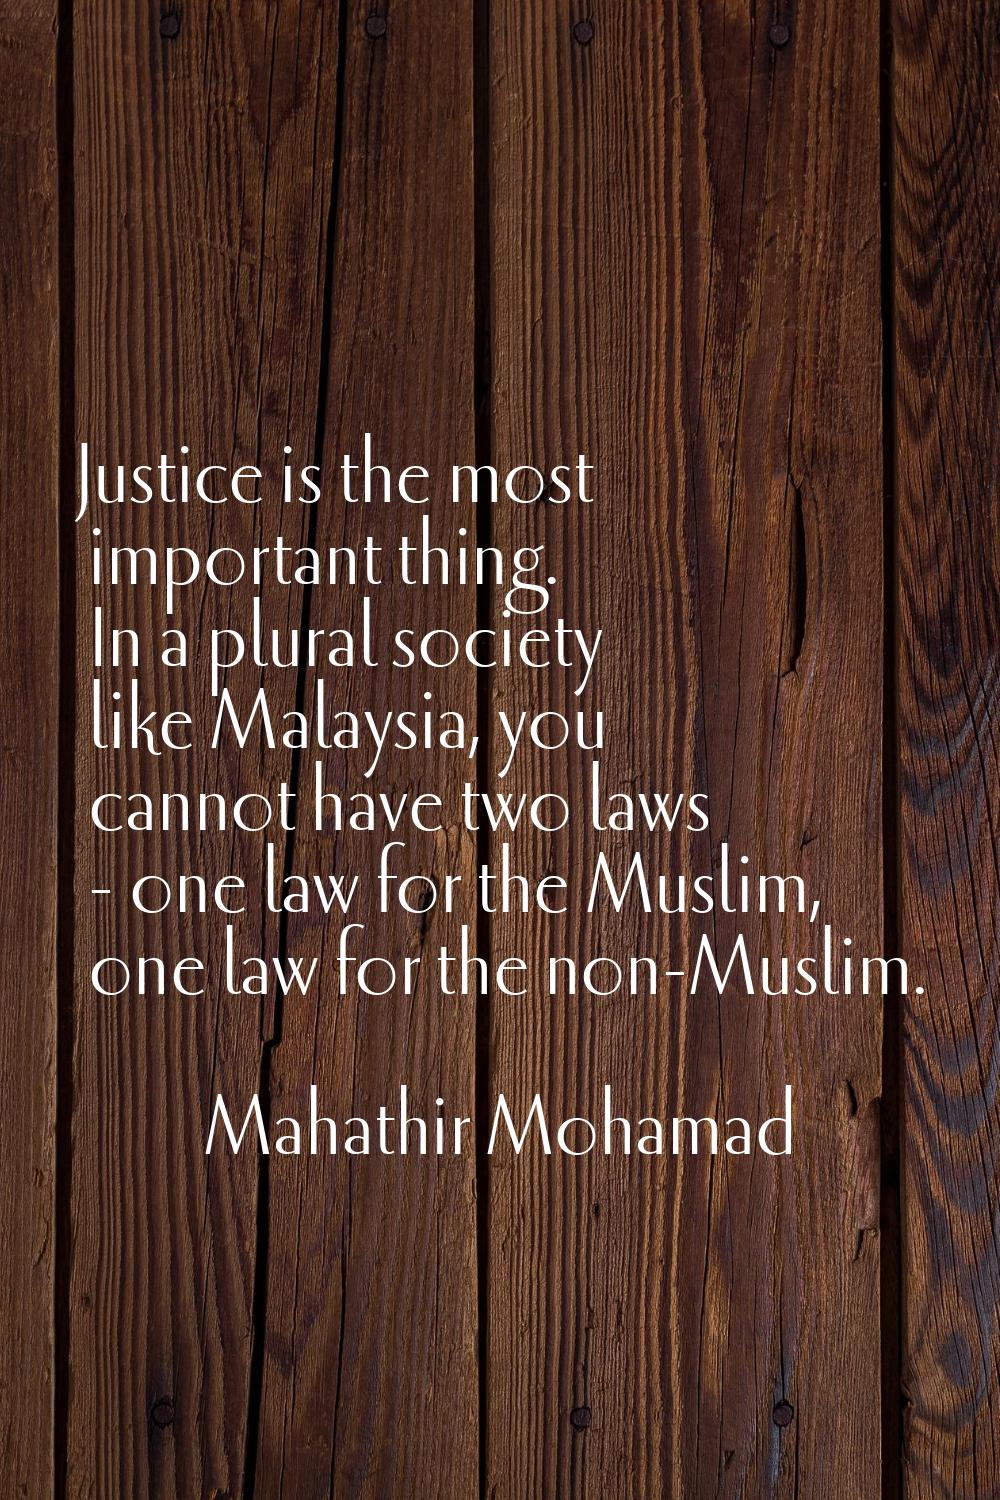 Justice is the most important thing. In a plural society like Malaysia, you cannot have two laws - 